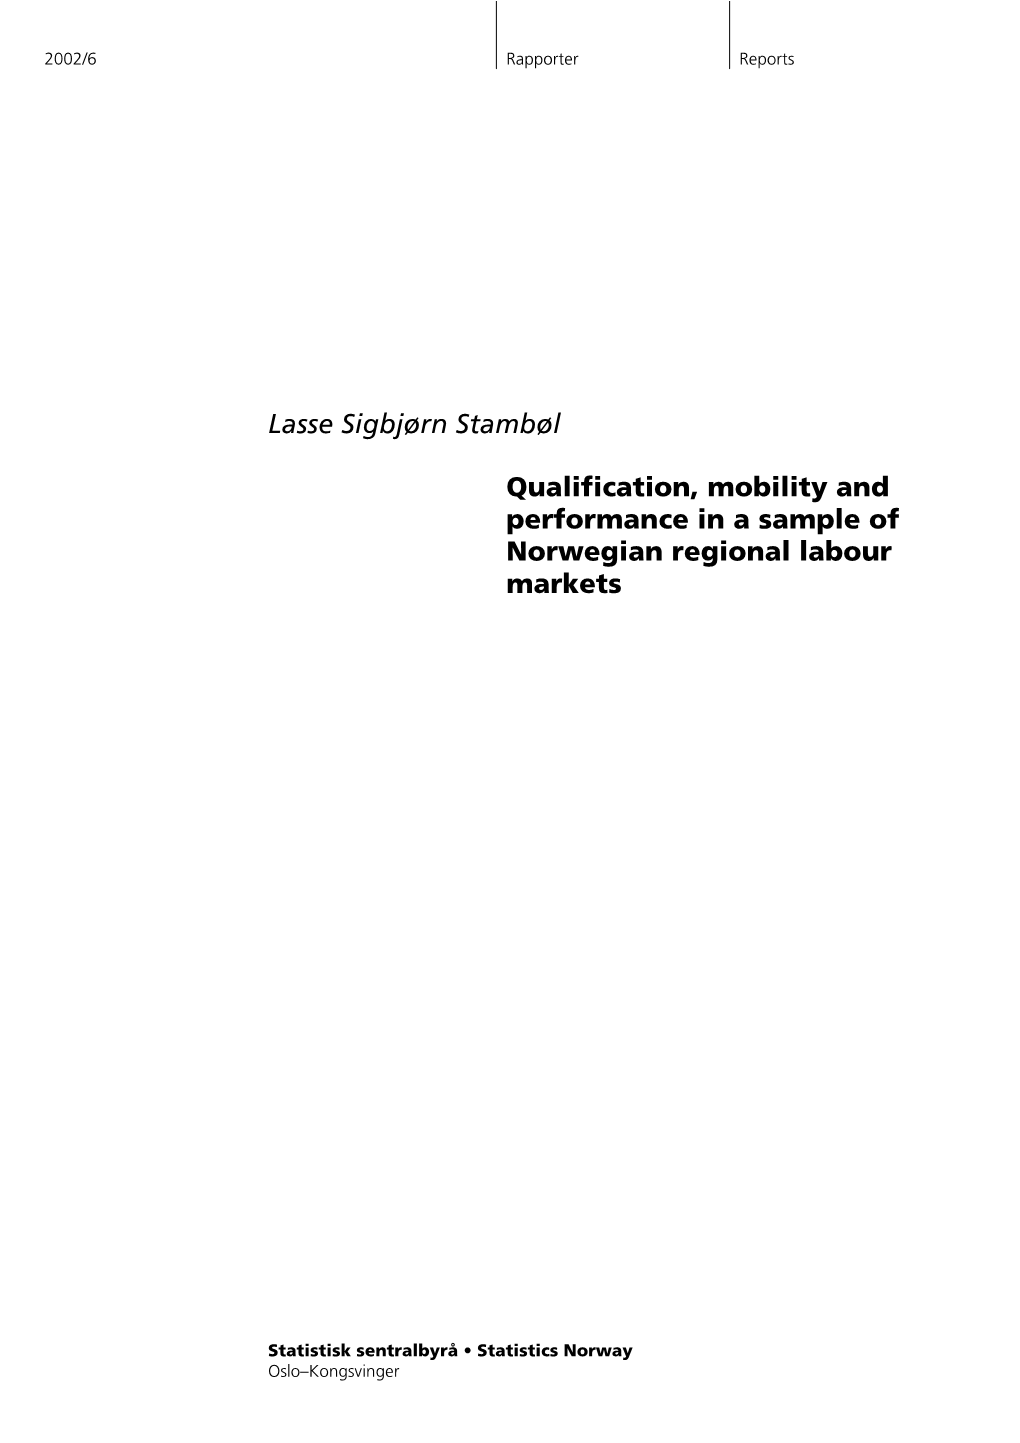 Lasse Sigbjørn Stambøl Qualification, Mobility and Performance in a Sample of Norwegian Regional Labour Markets